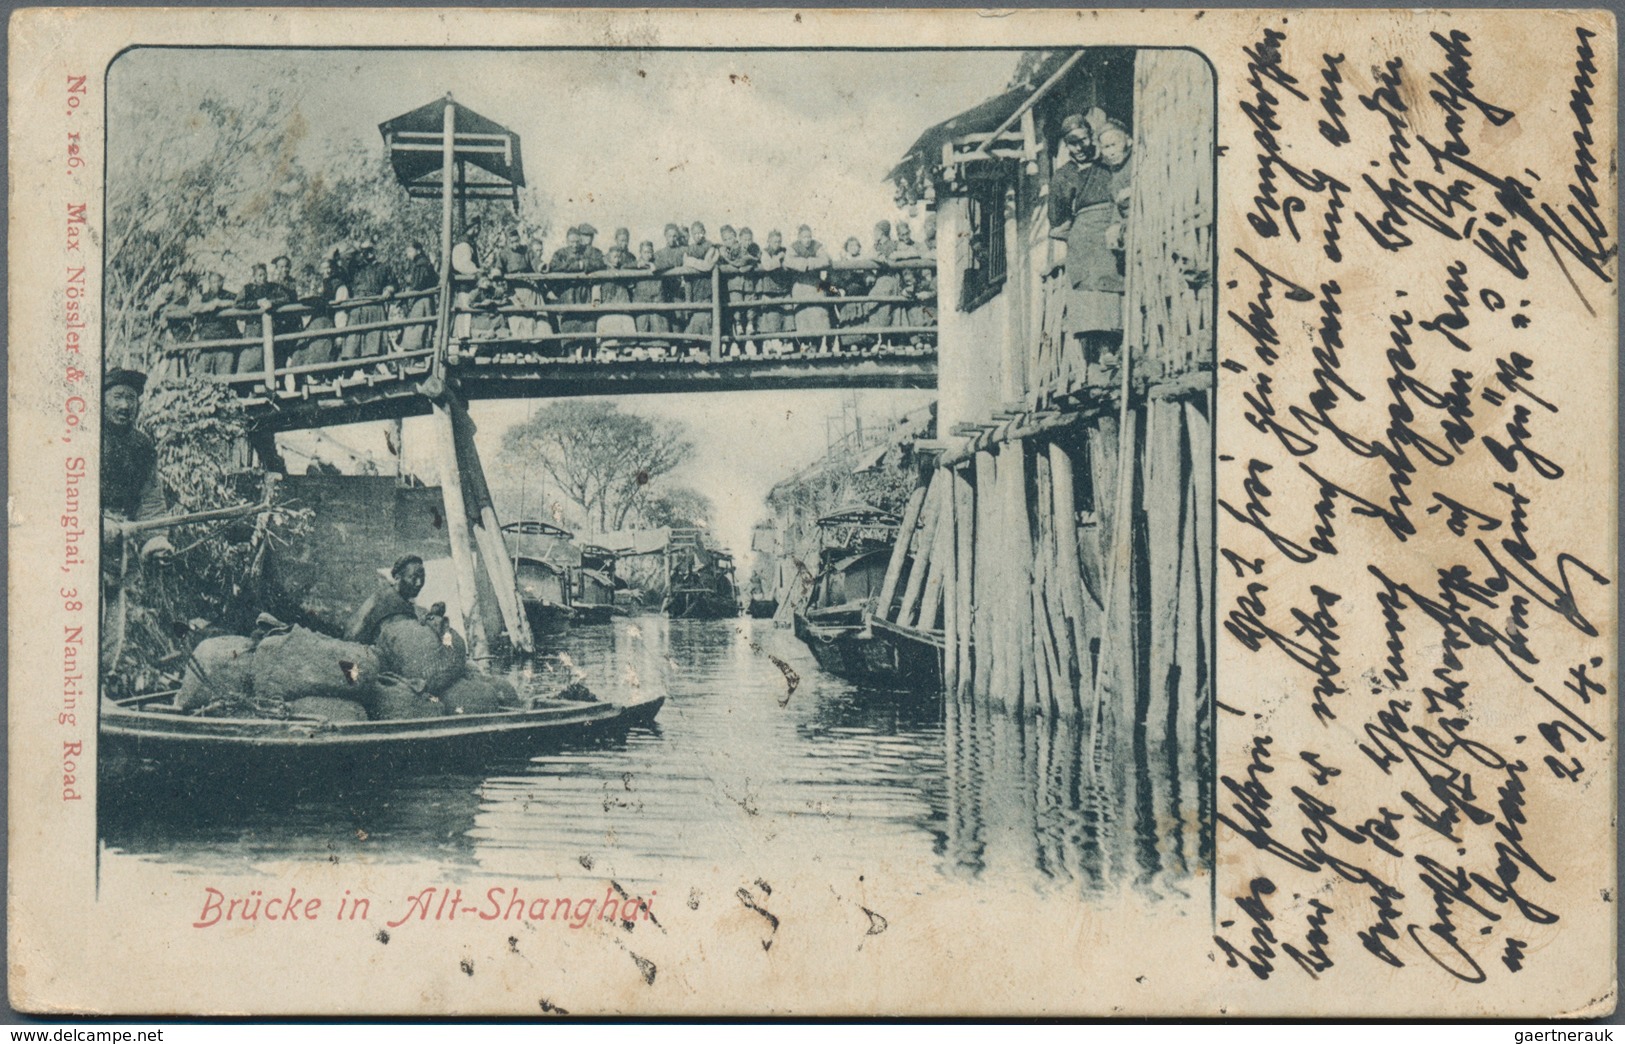 China - Besonderheiten: 1900/30 (ca.), 17 ppc with Shanghai city (both western settlements and old c